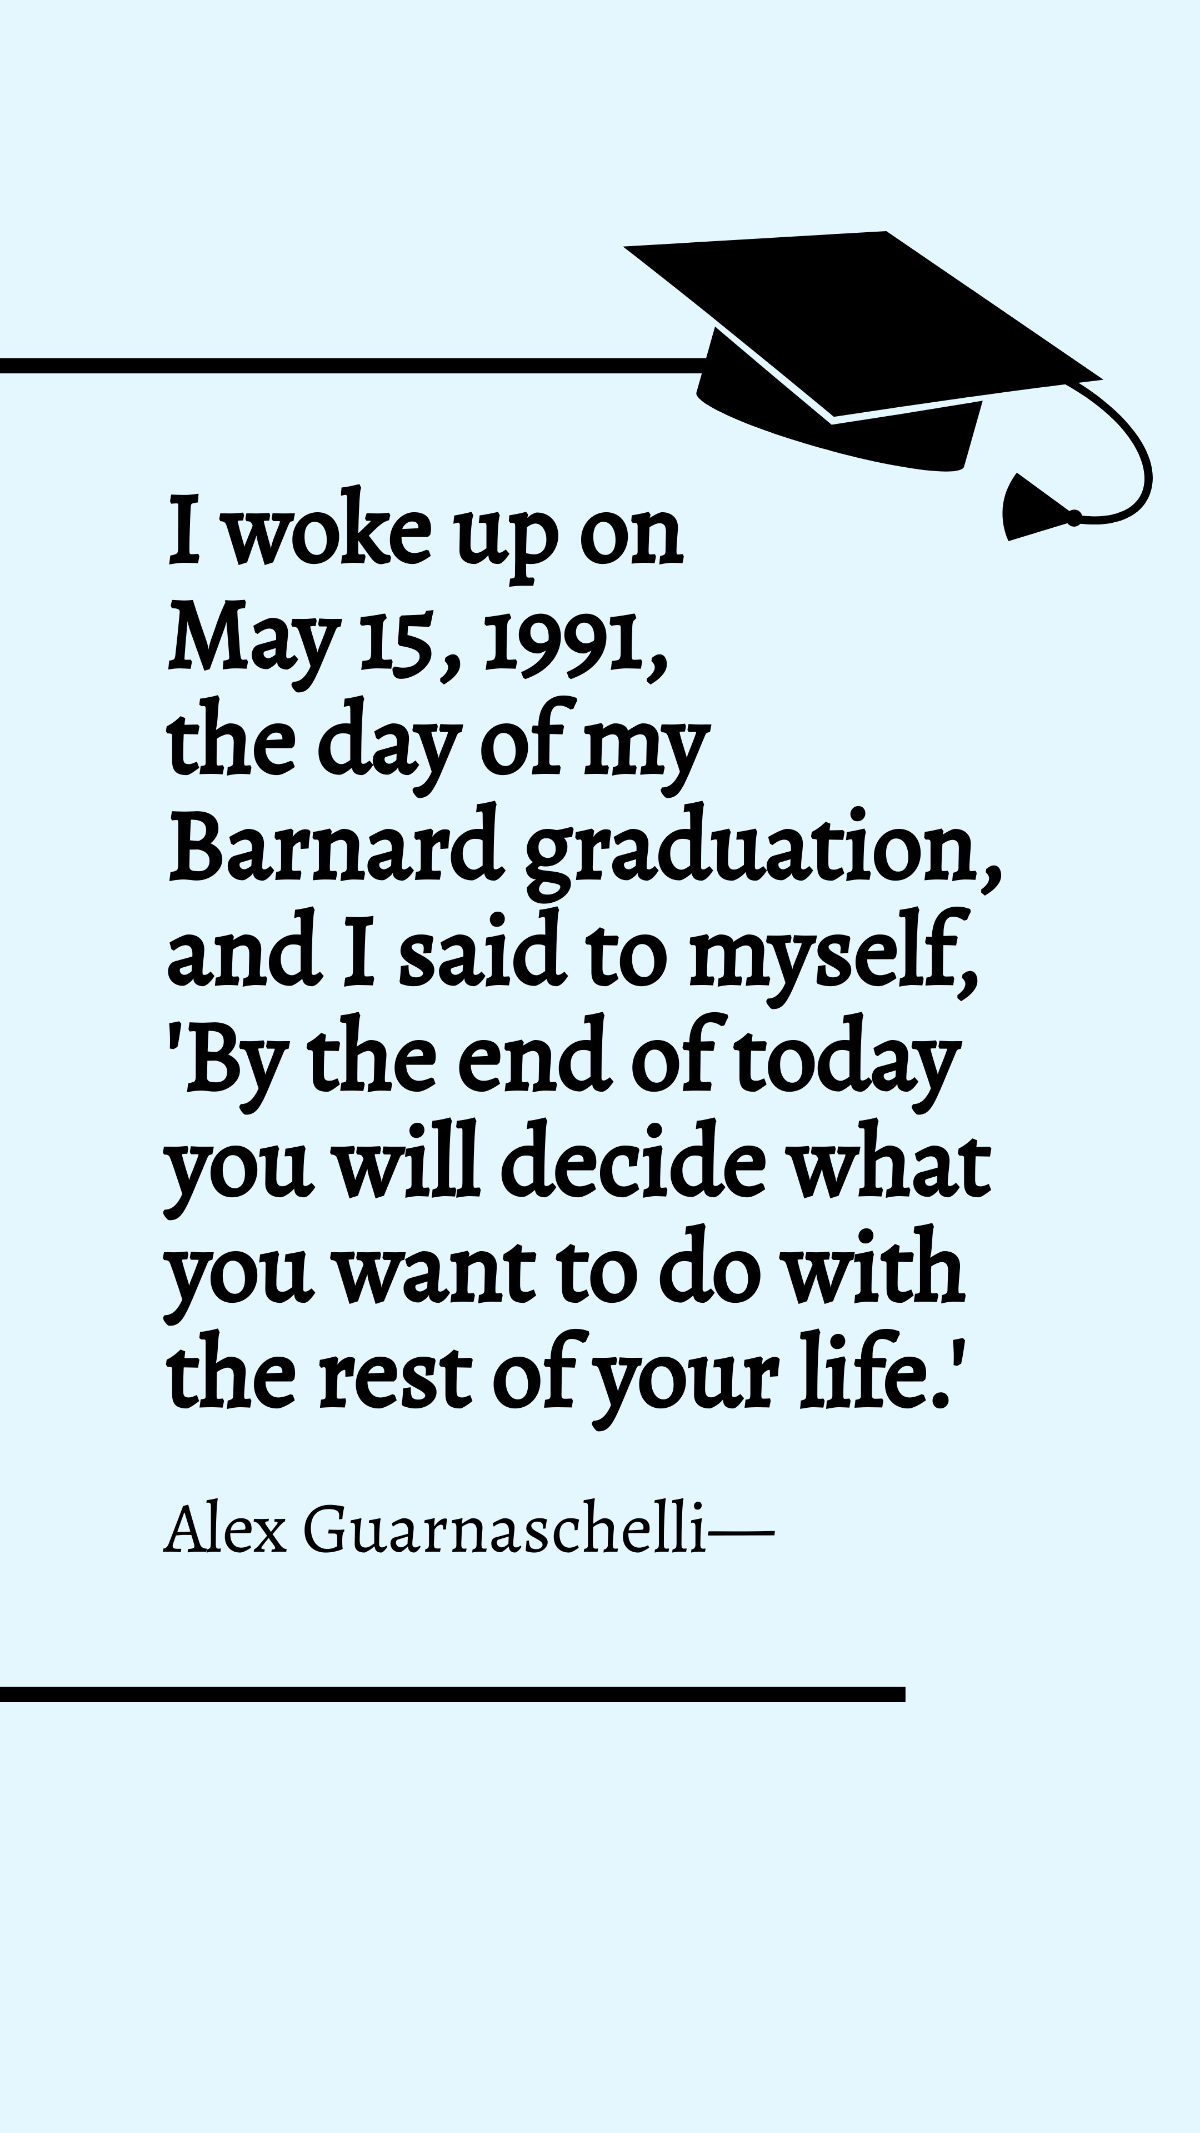 Alex Guarnaschelli - I woke up on May 15, 1991, the day of my Barnard graduation, and I said to myself, 'By the end of today you will decide what you want to do with the rest of your life.' Template